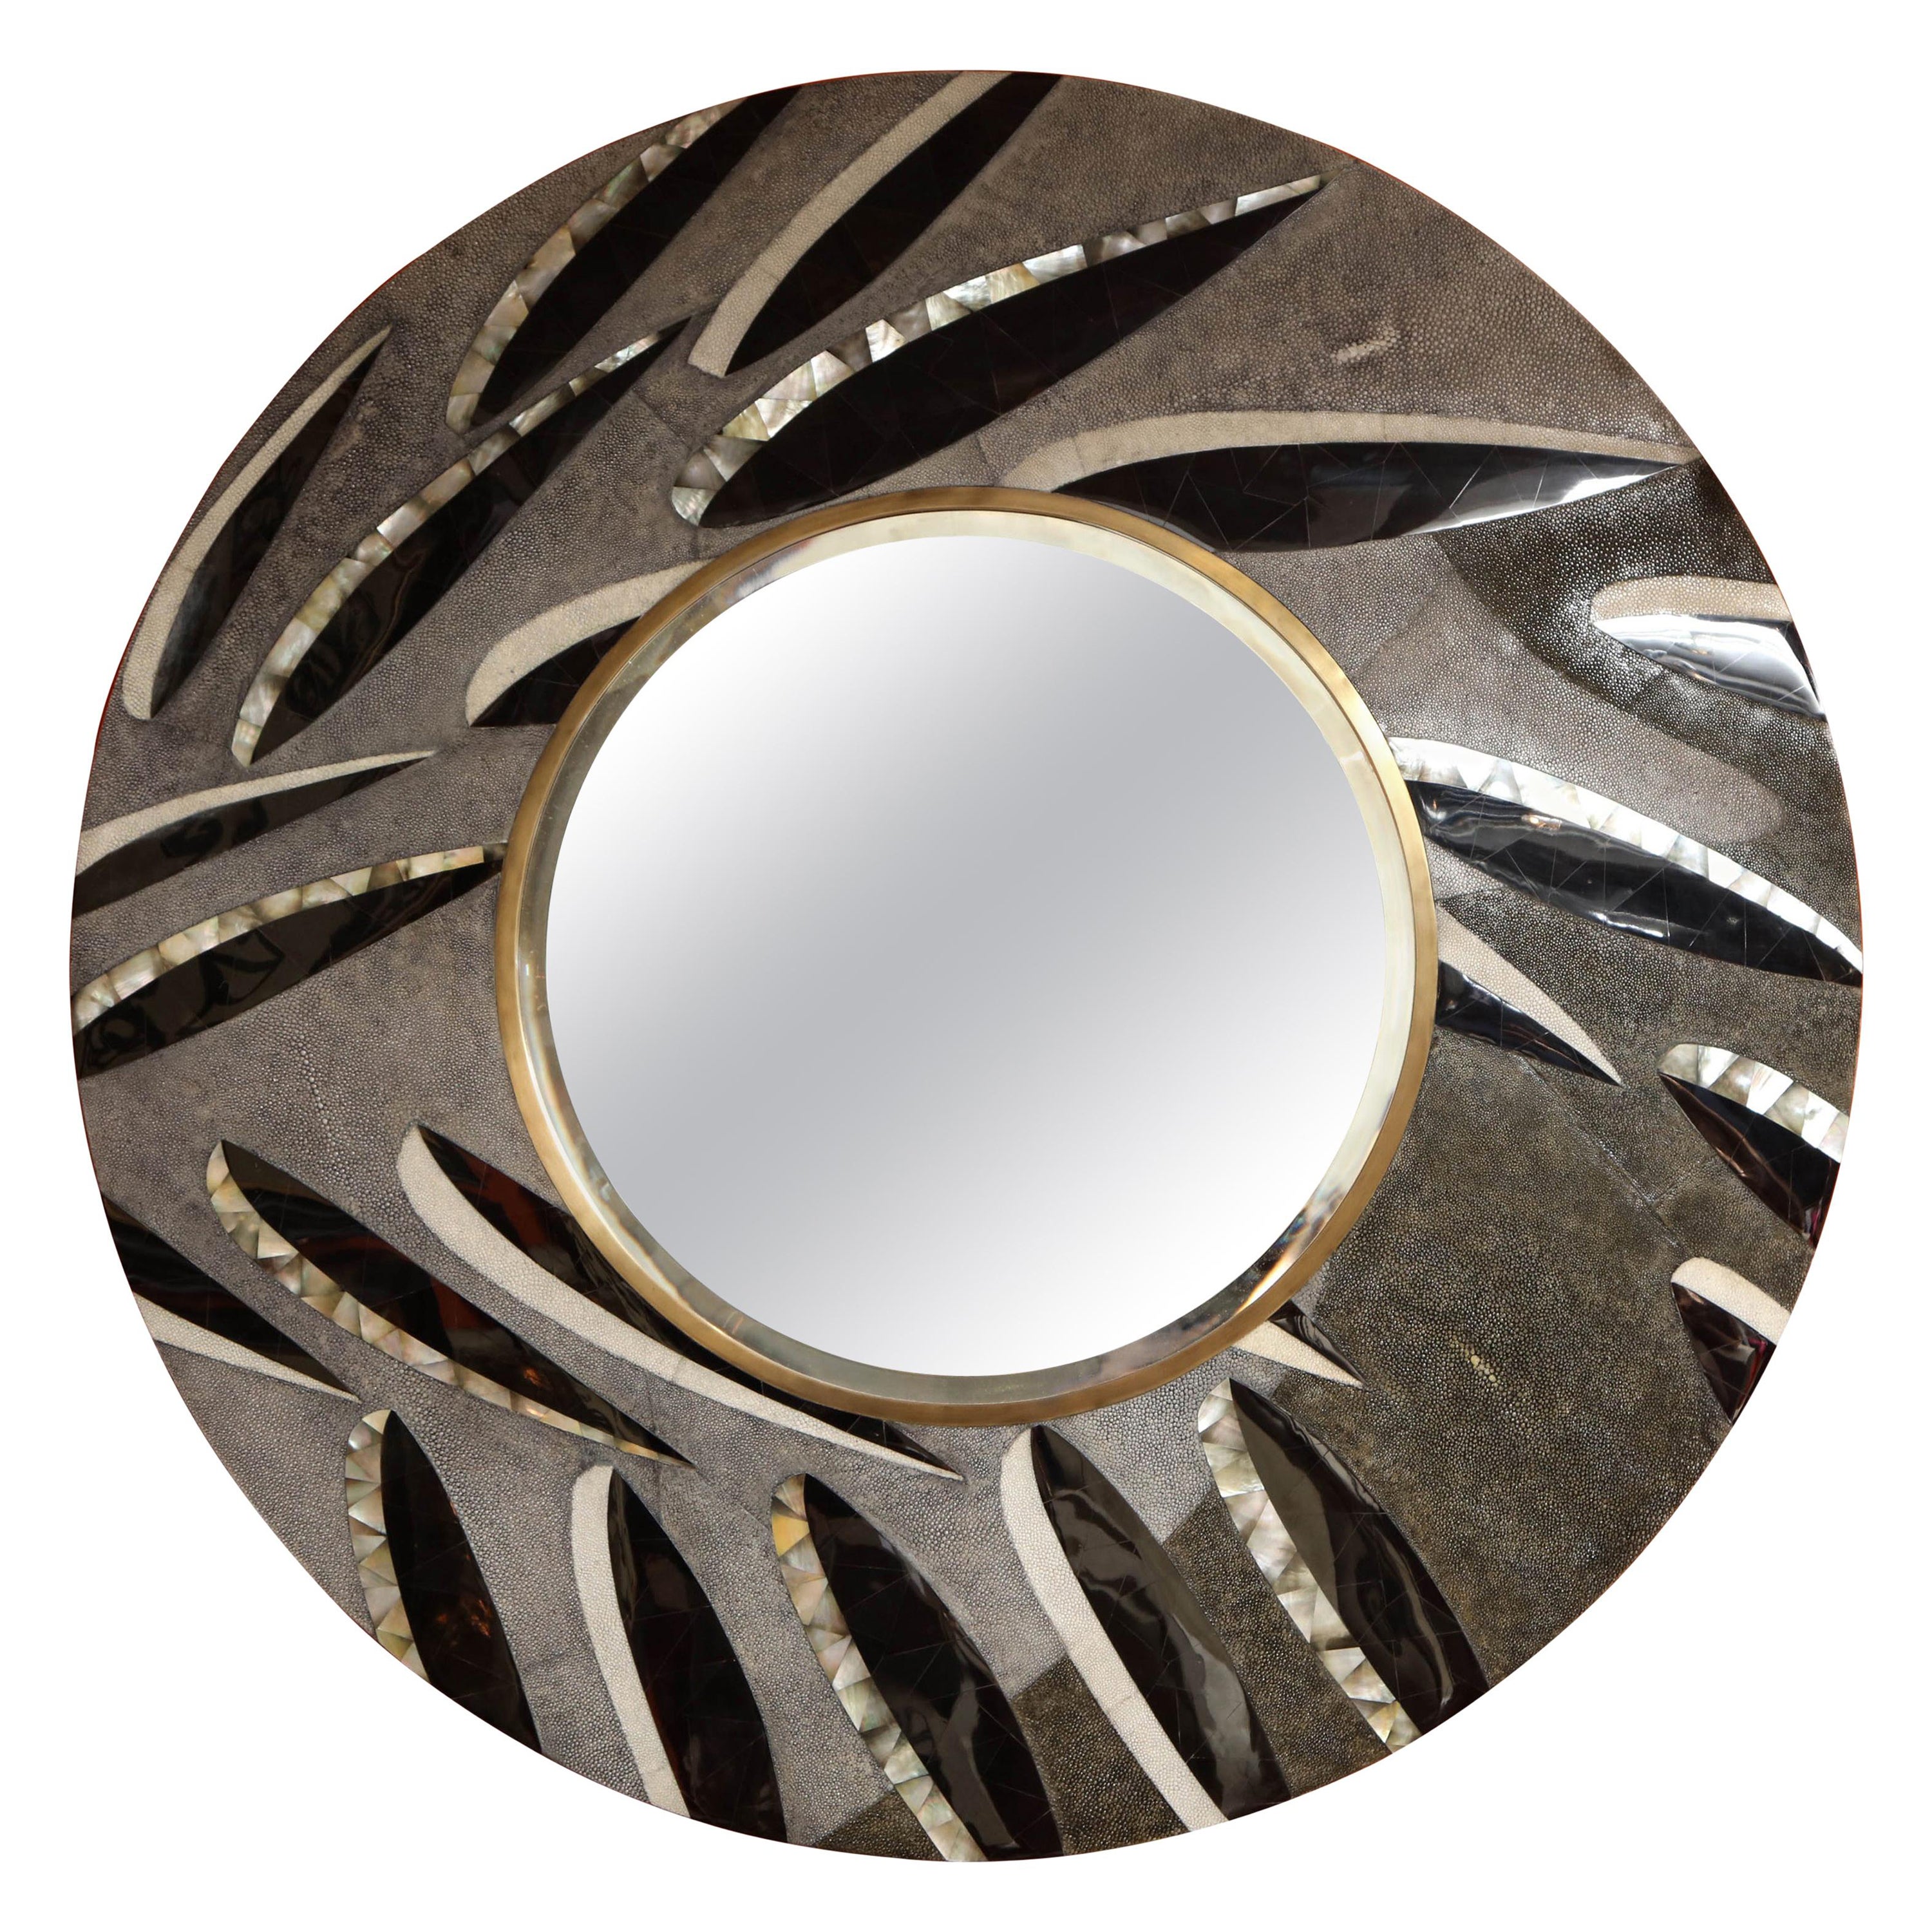 Mirror, Shagreen Mirror with Brass and Sea Shell Details, Round Large Scale, New